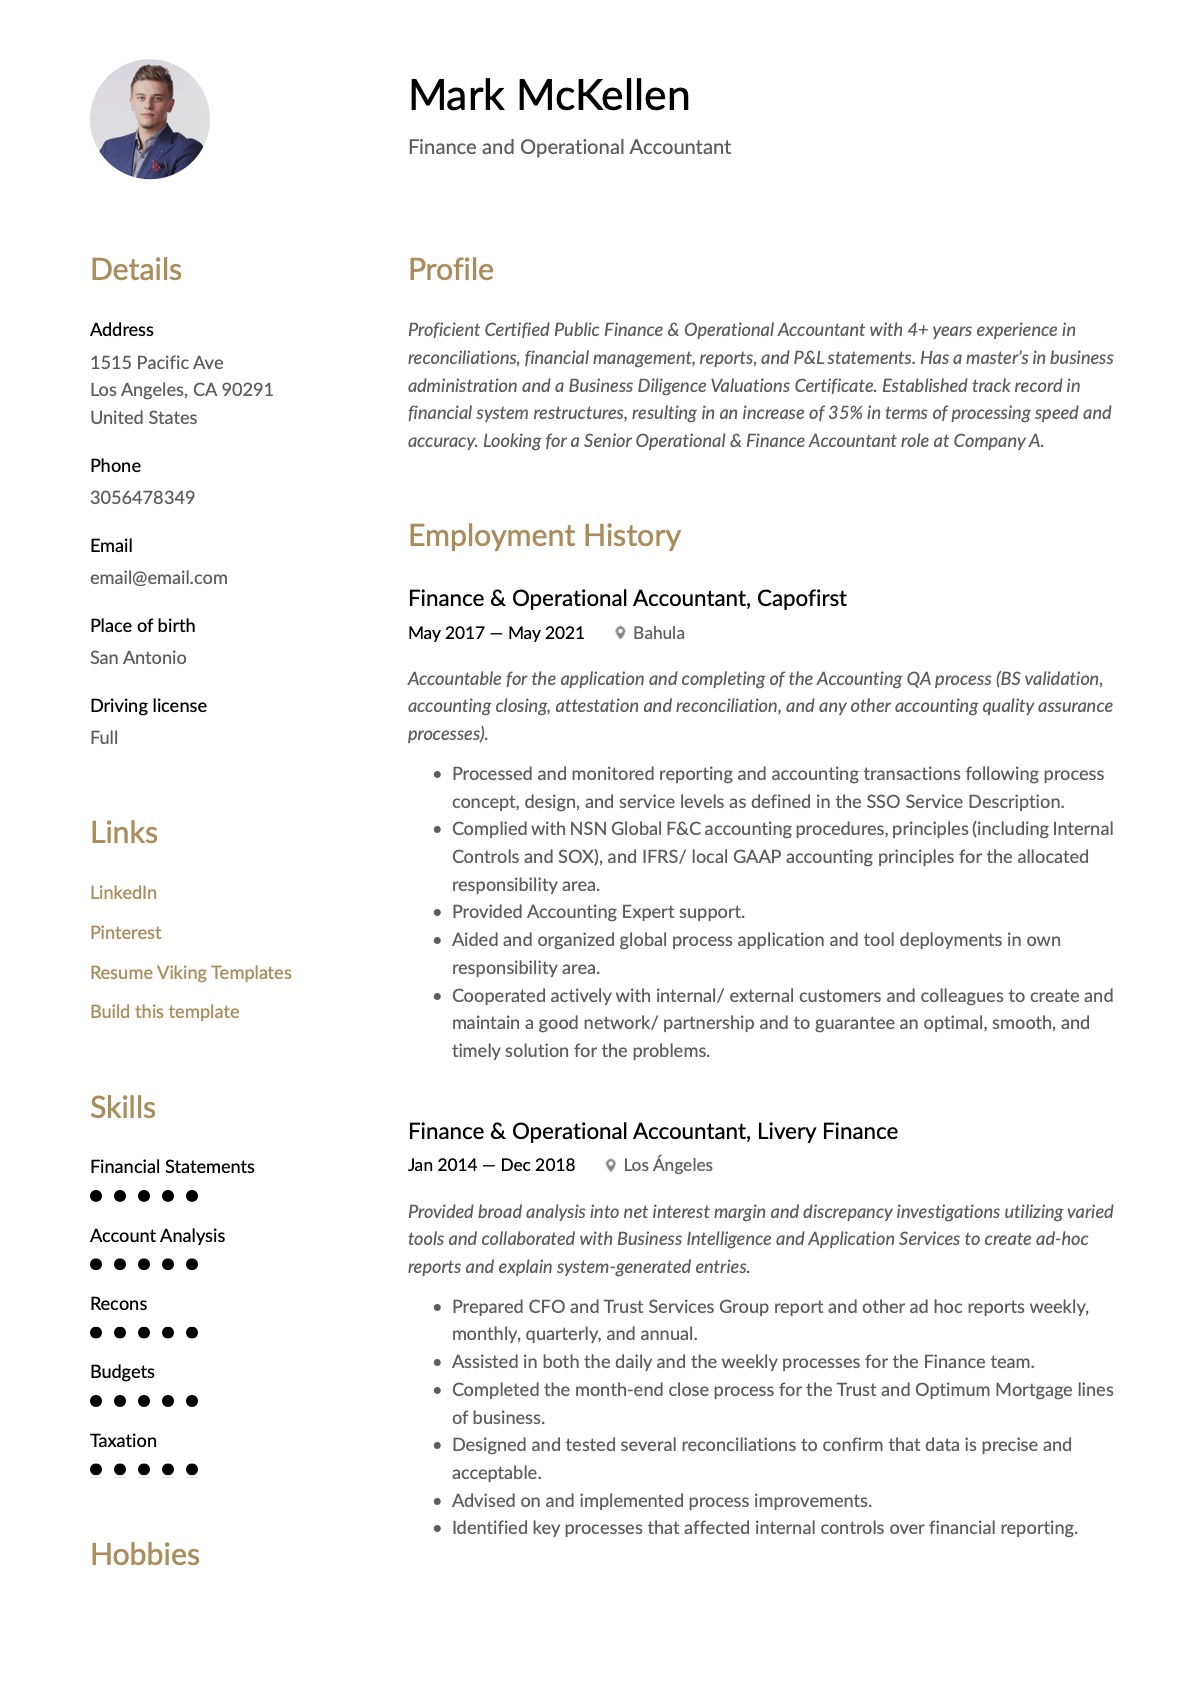 Finance & Operational Accountant Resume Template